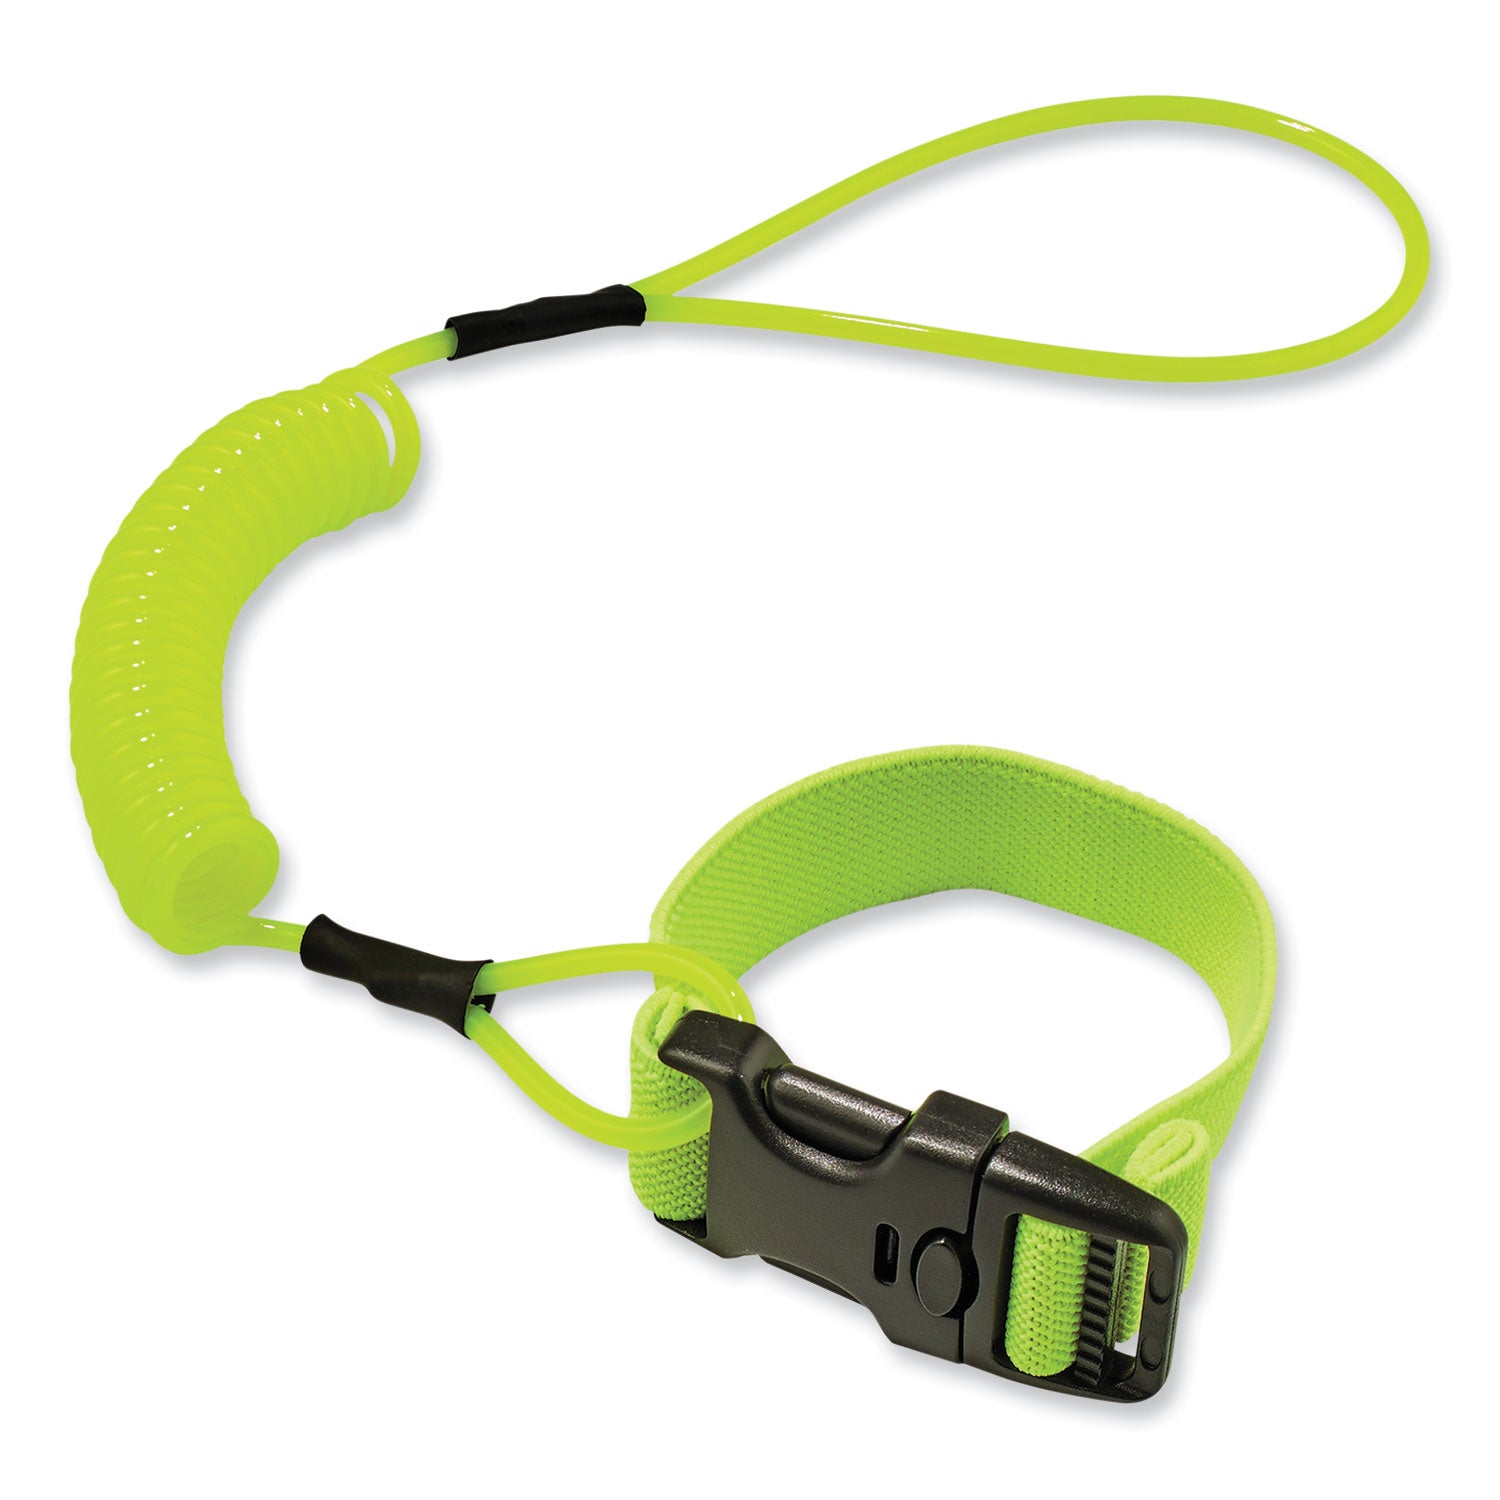 squids-3157-coiled-lanyard-with-buckle-2-lb-max-working-capacity-12-to-48-long-lime-ships-in-1-3-business-days_ego19157 - 1